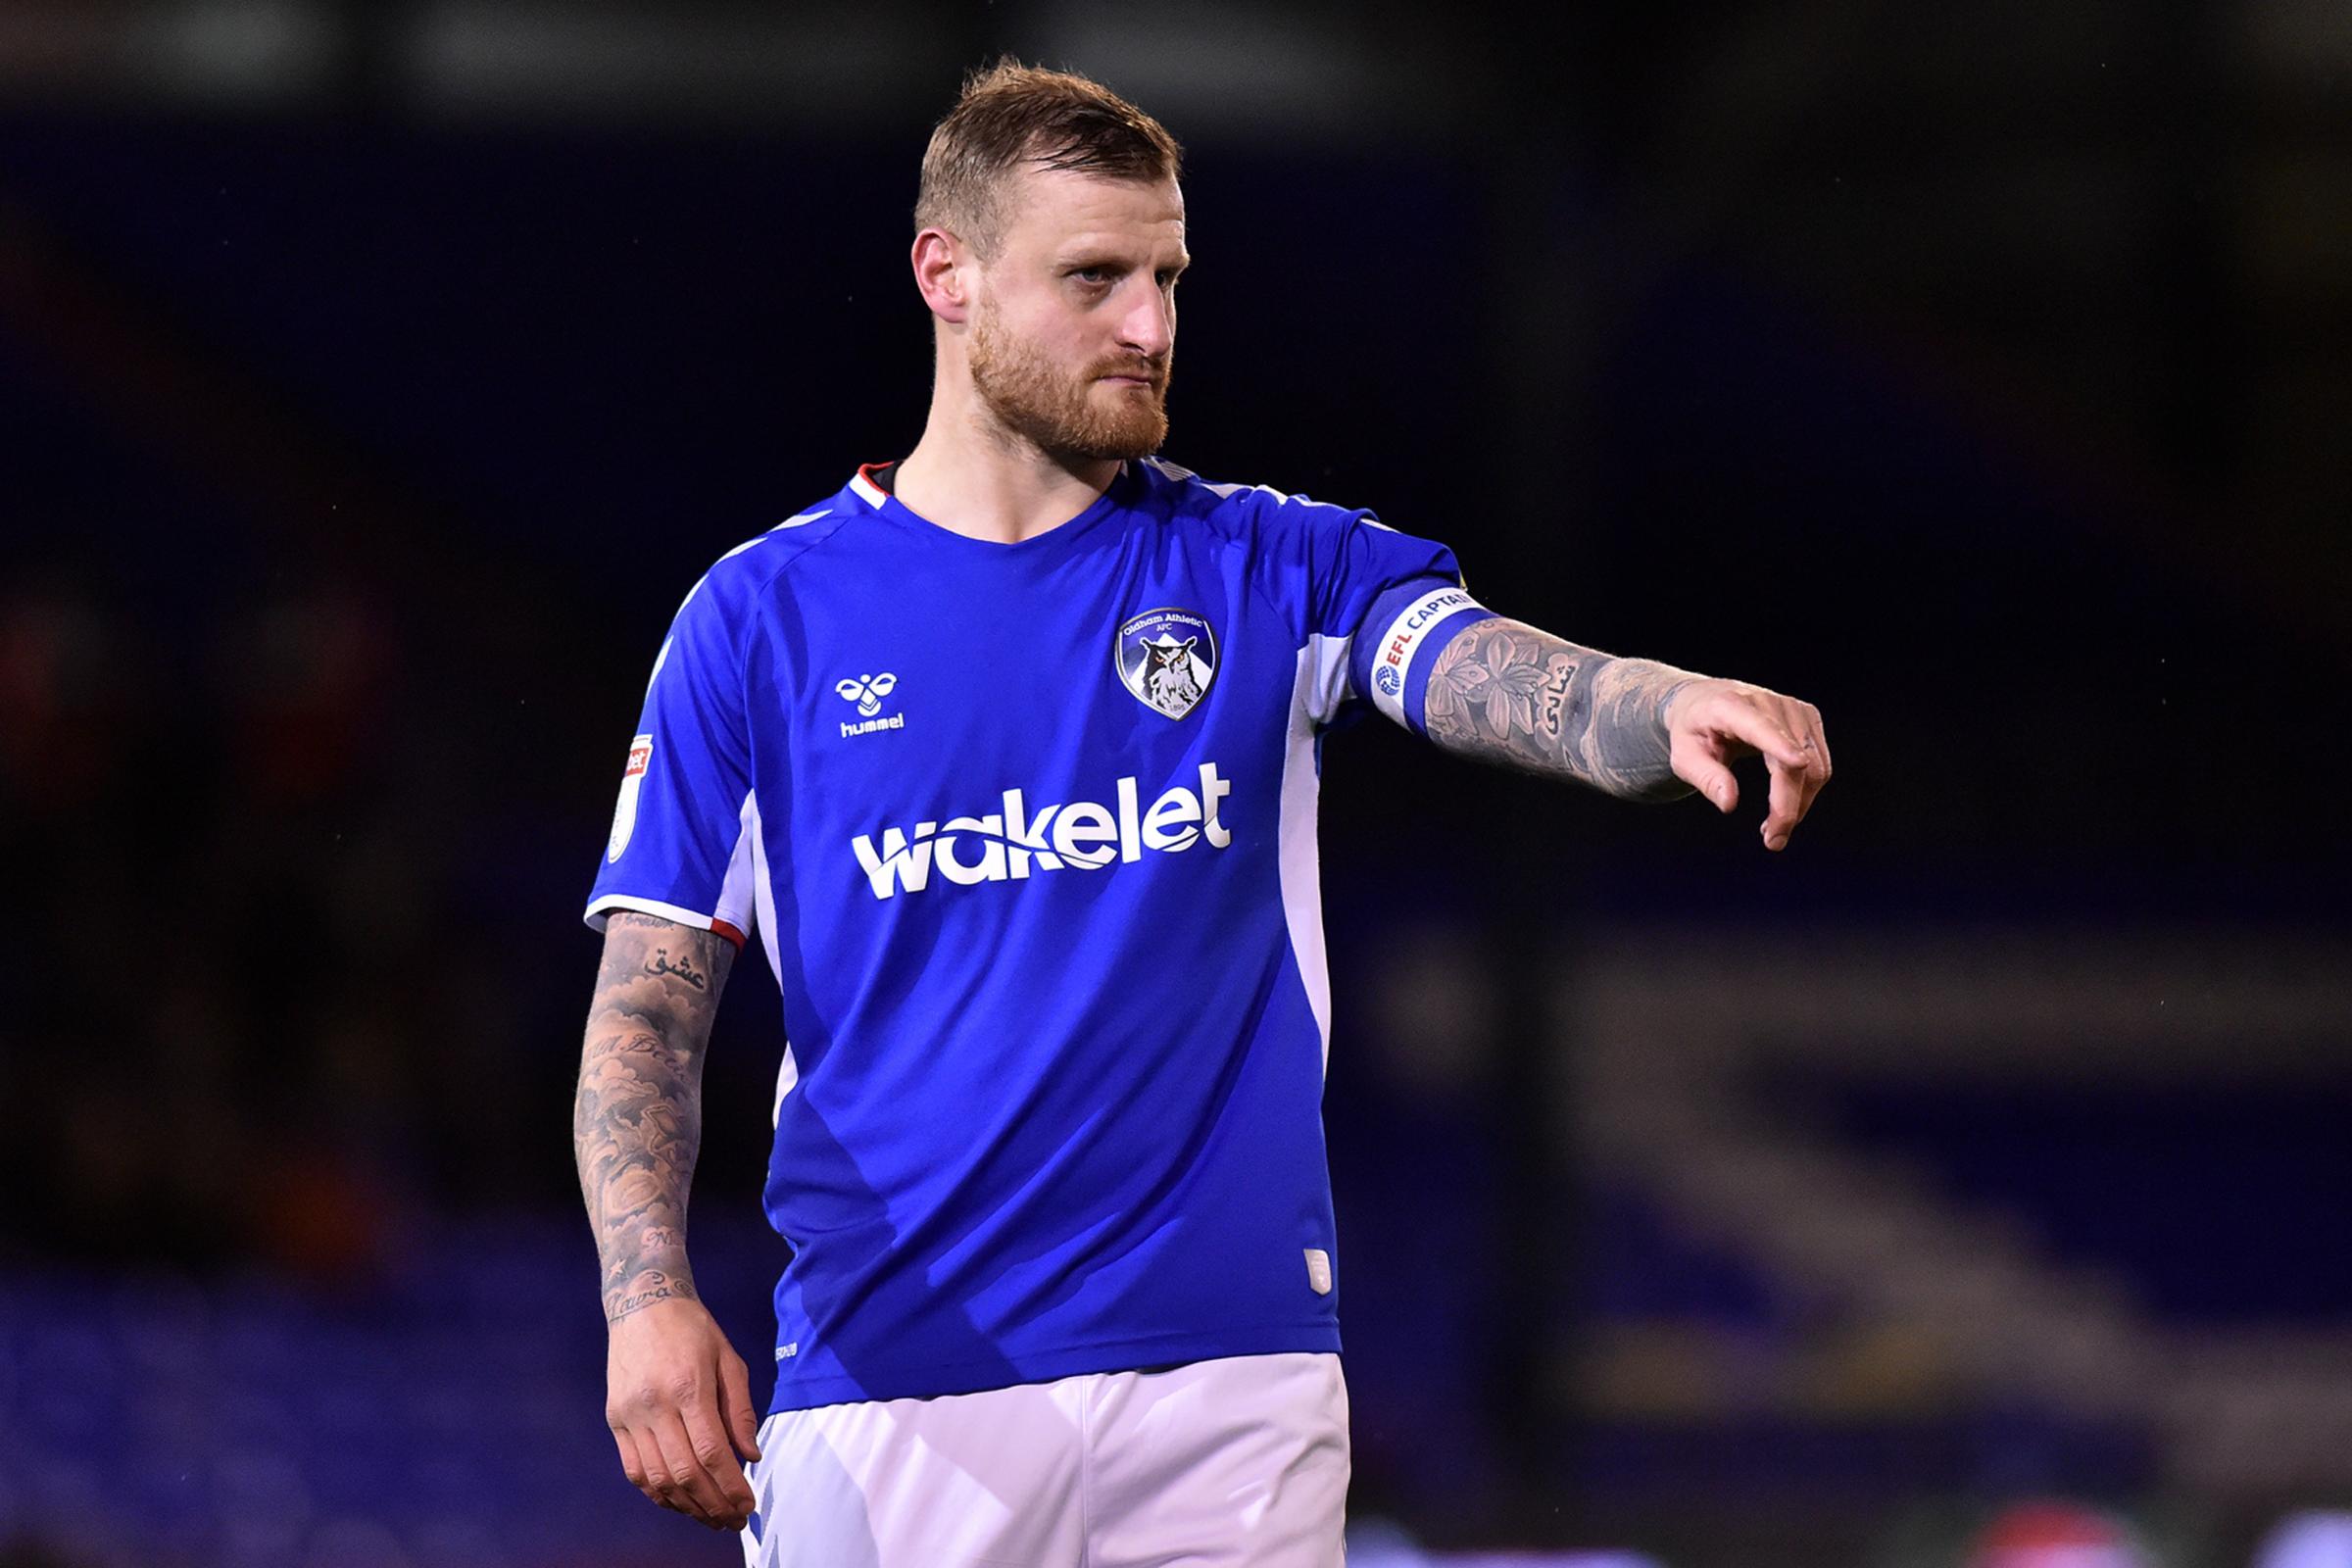 Former Boro defender Wheater could return with Darlington